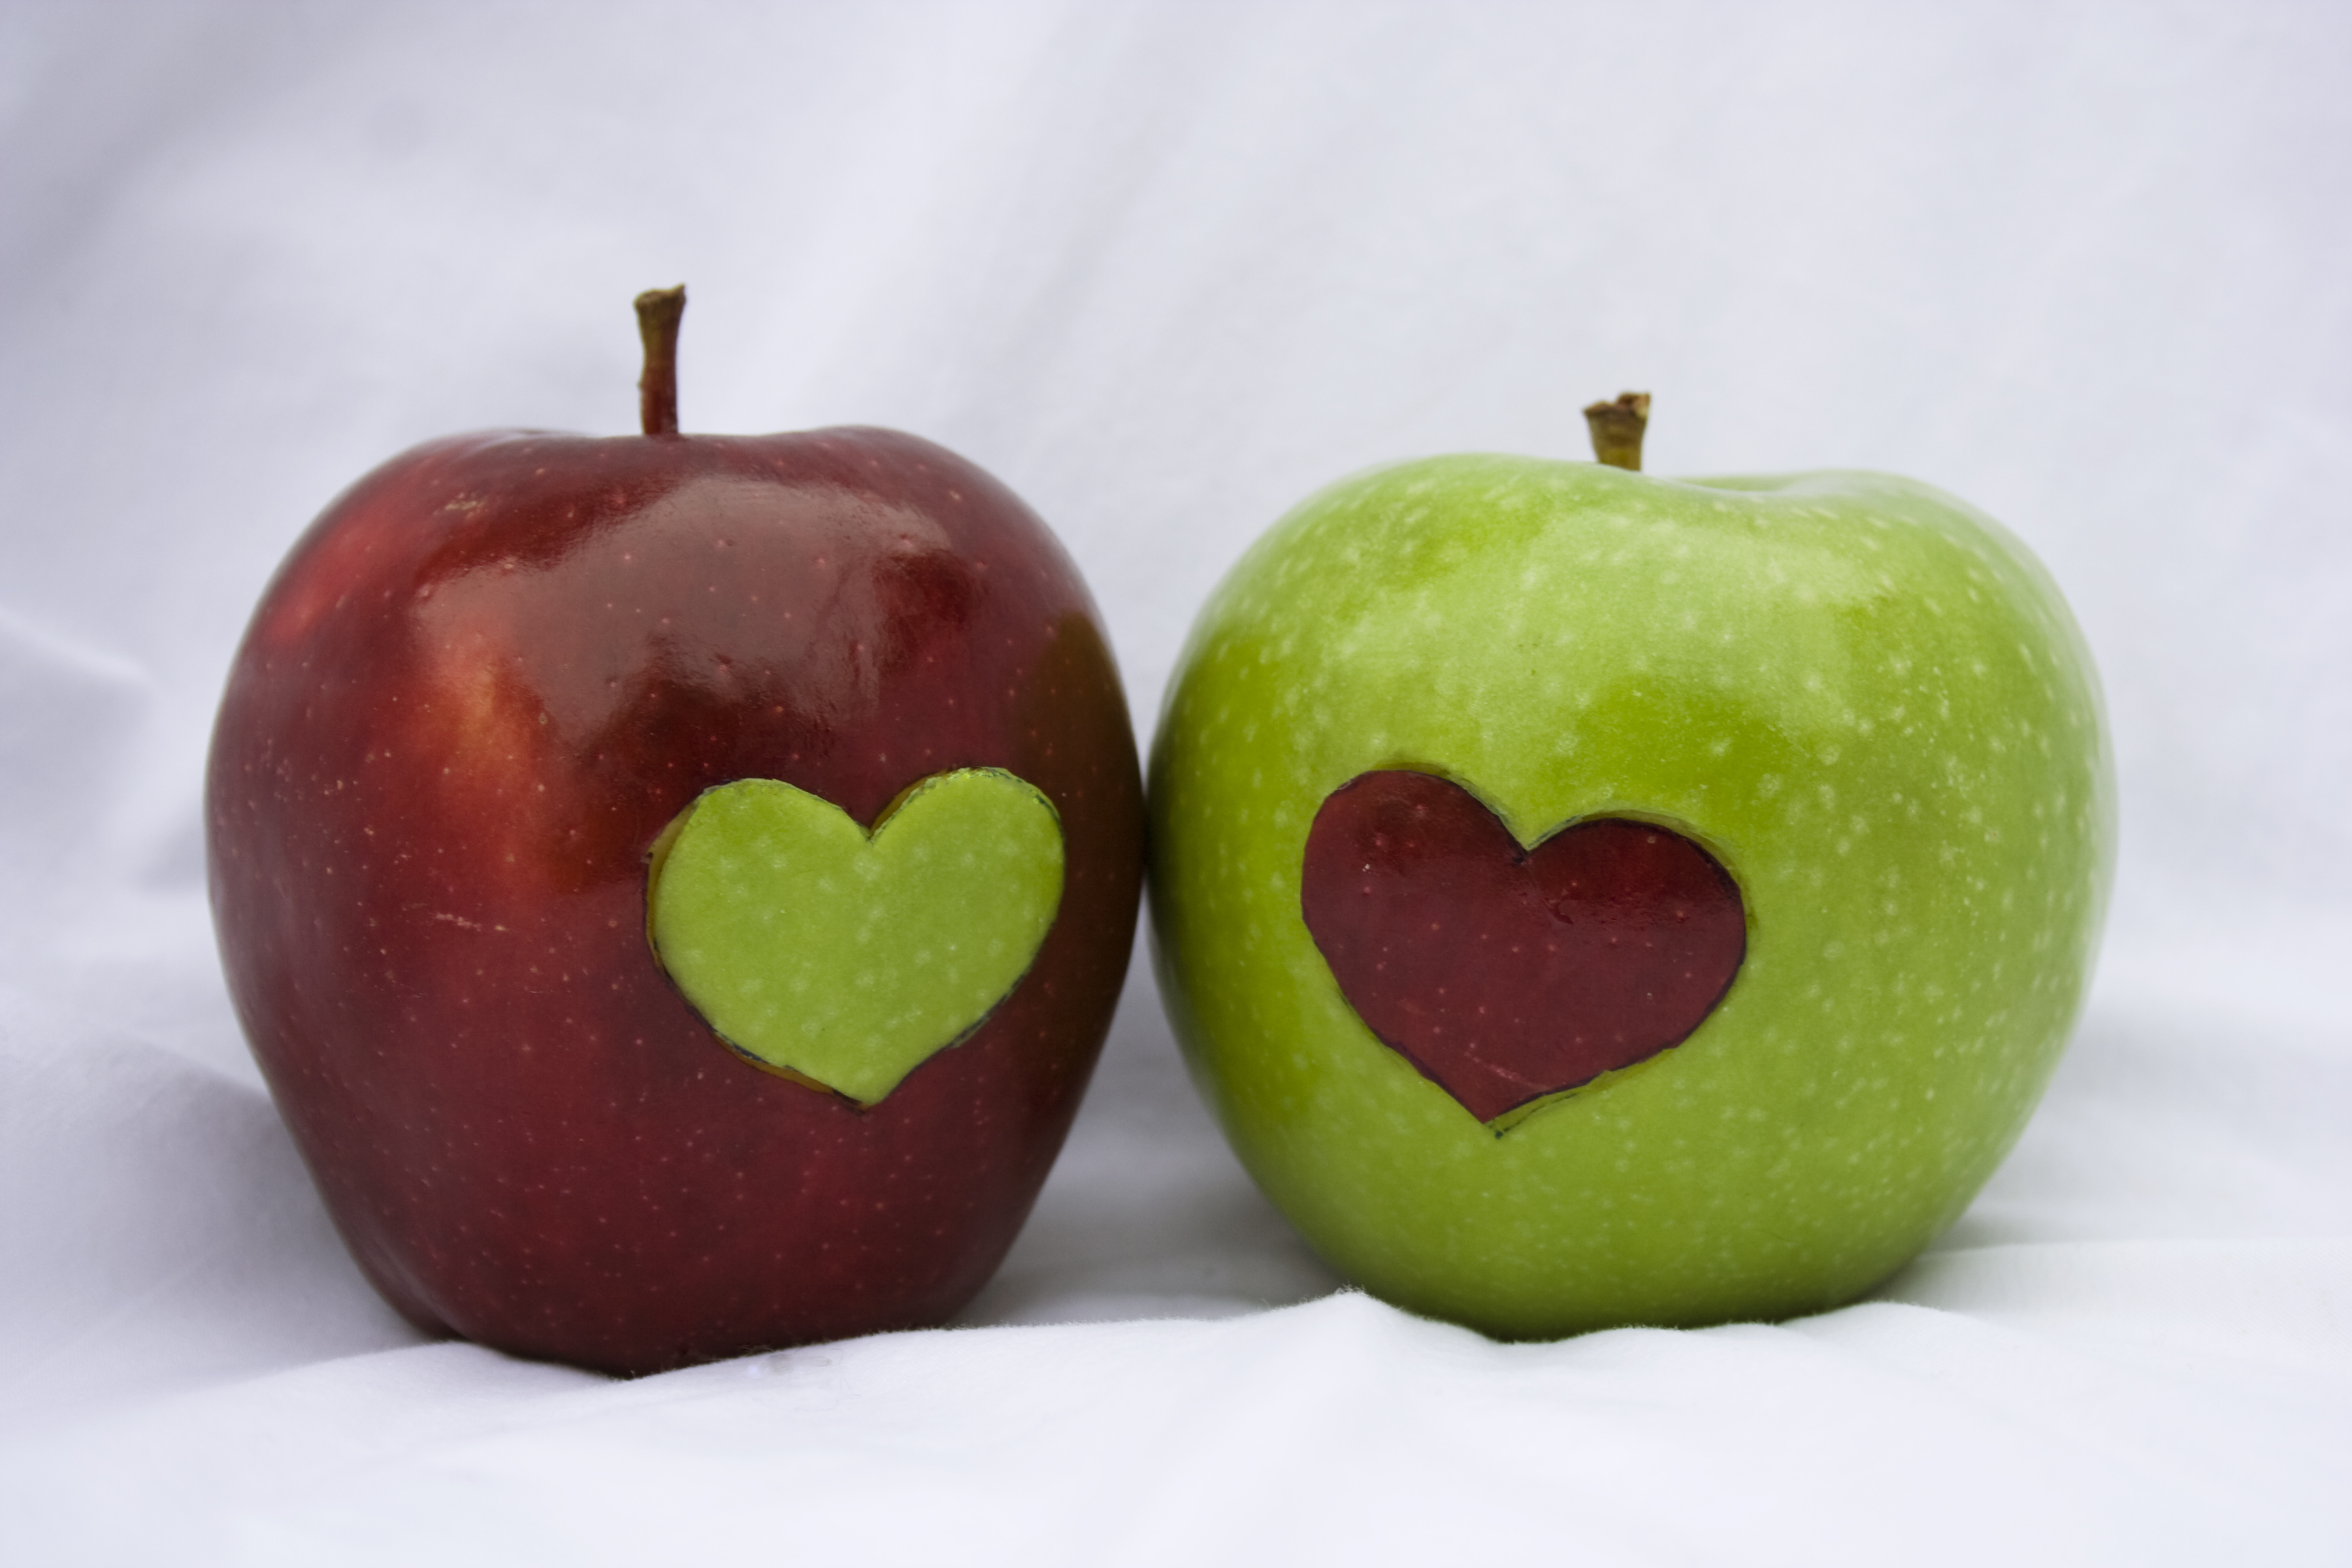 Apples are rich in quercetin, which is an anti-inflammatory.